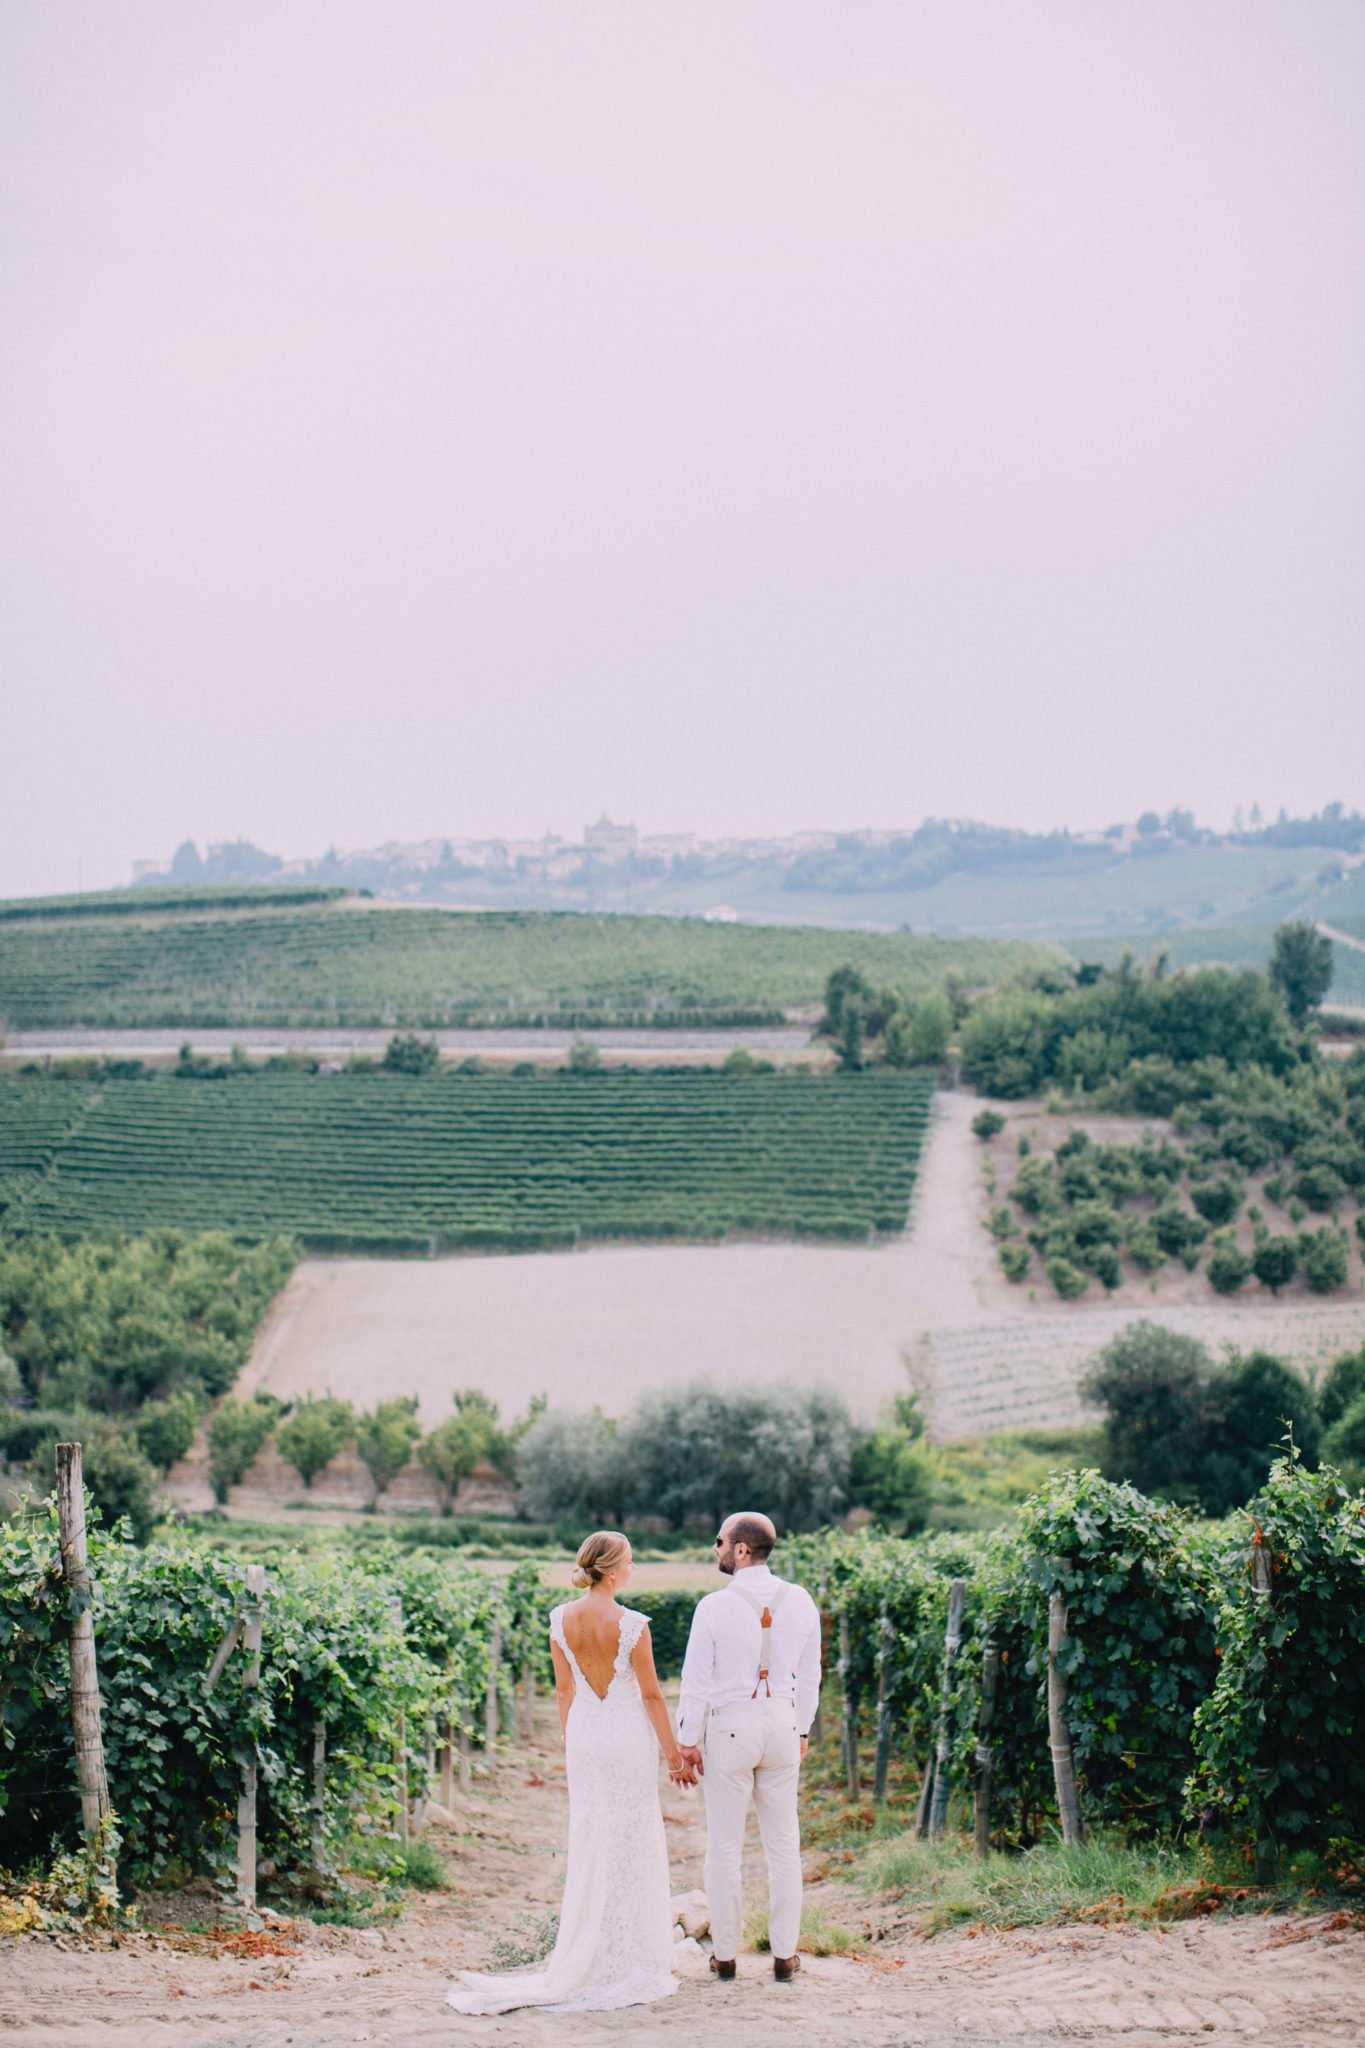 Stefano Santucci: Wedding Photography Inspired by Romance